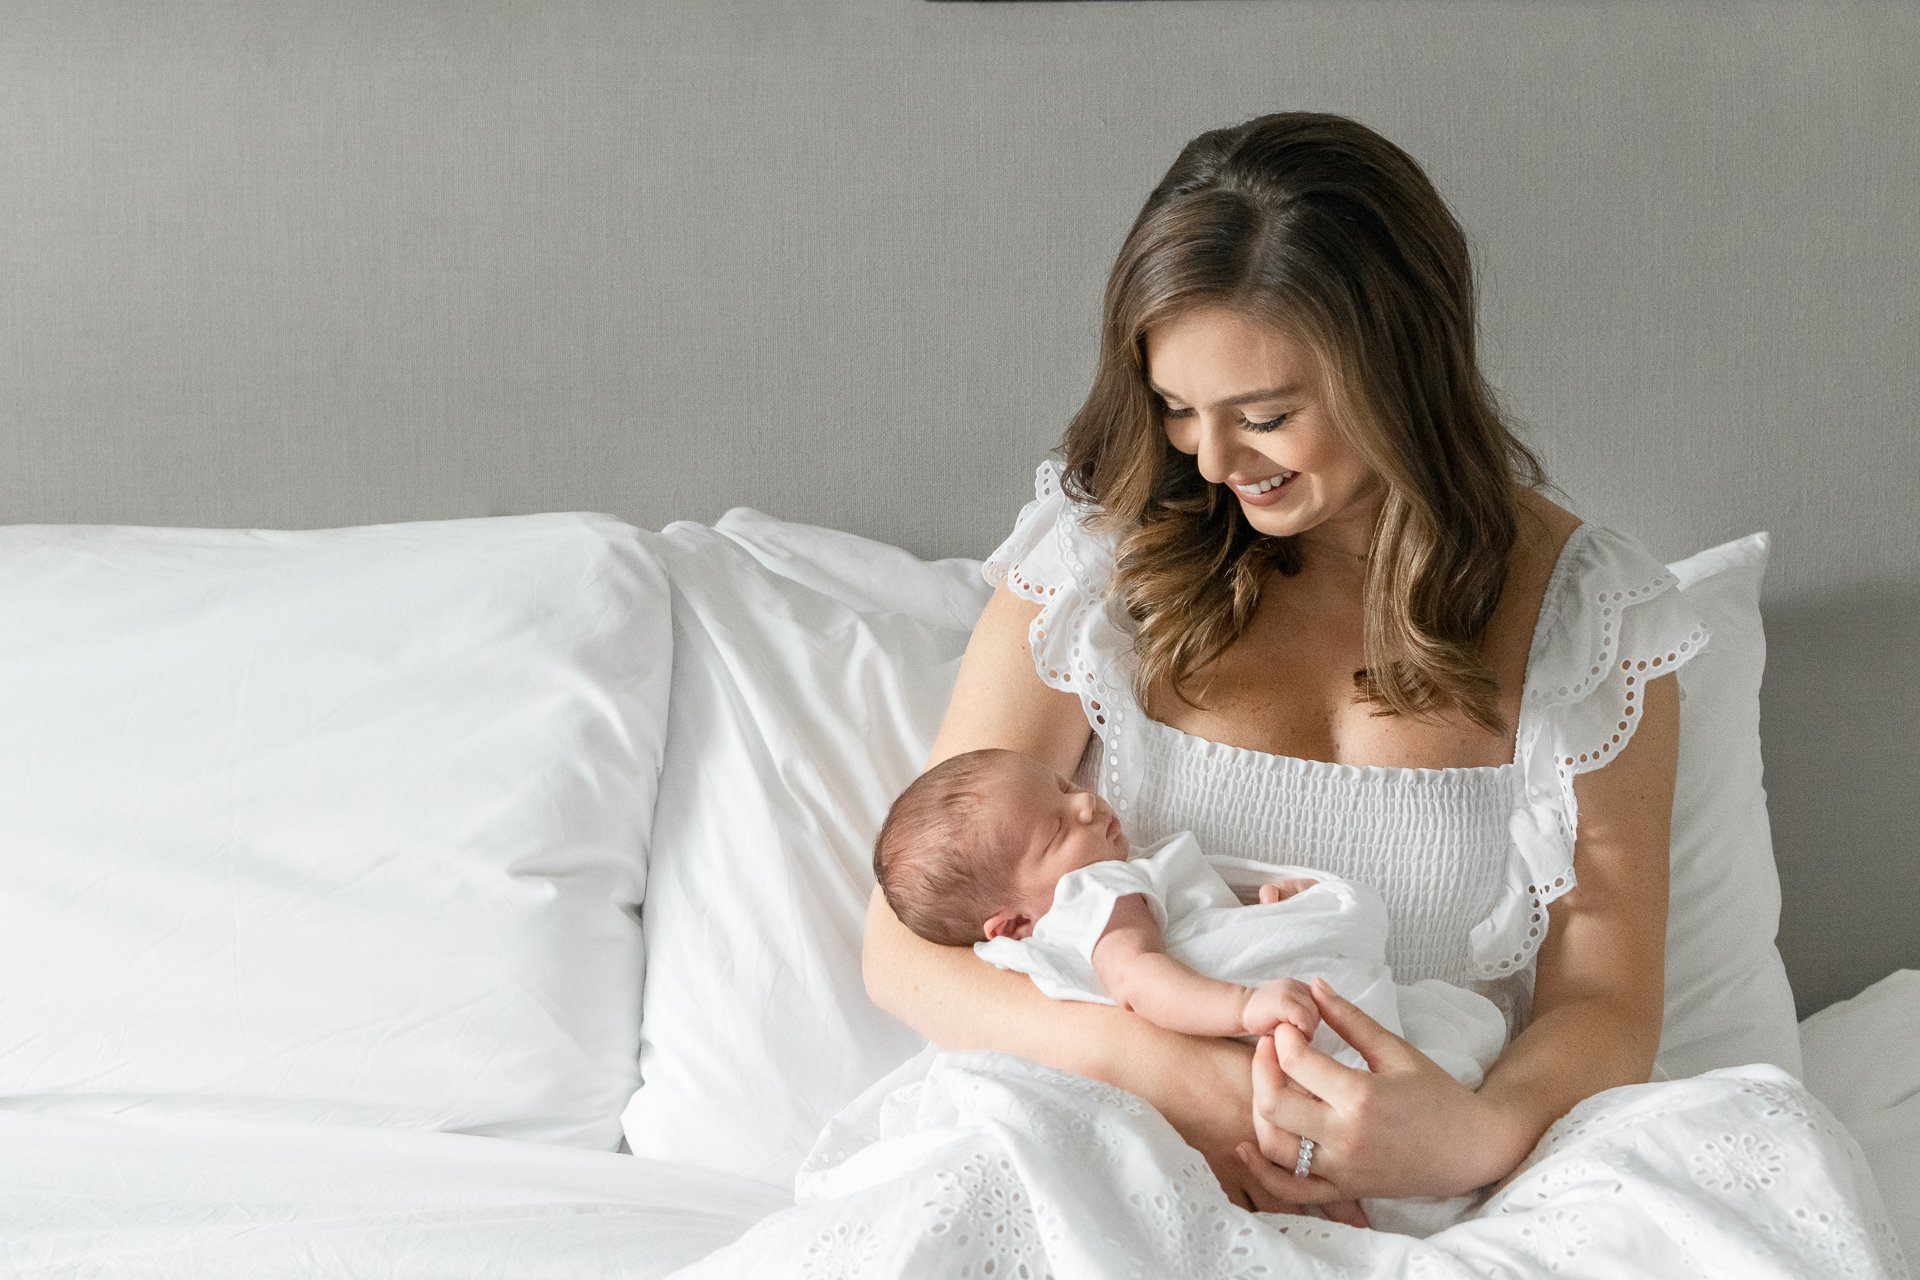  Nicole Hawkins Photography captures a mother sitting on her bed holding her newborn baby. New York City newborn photographer motherhood photo #nicolehawkinsphotography #NYCbabyphotography #newbornportraits #NewYorkStudioPhotography #newbornsession 